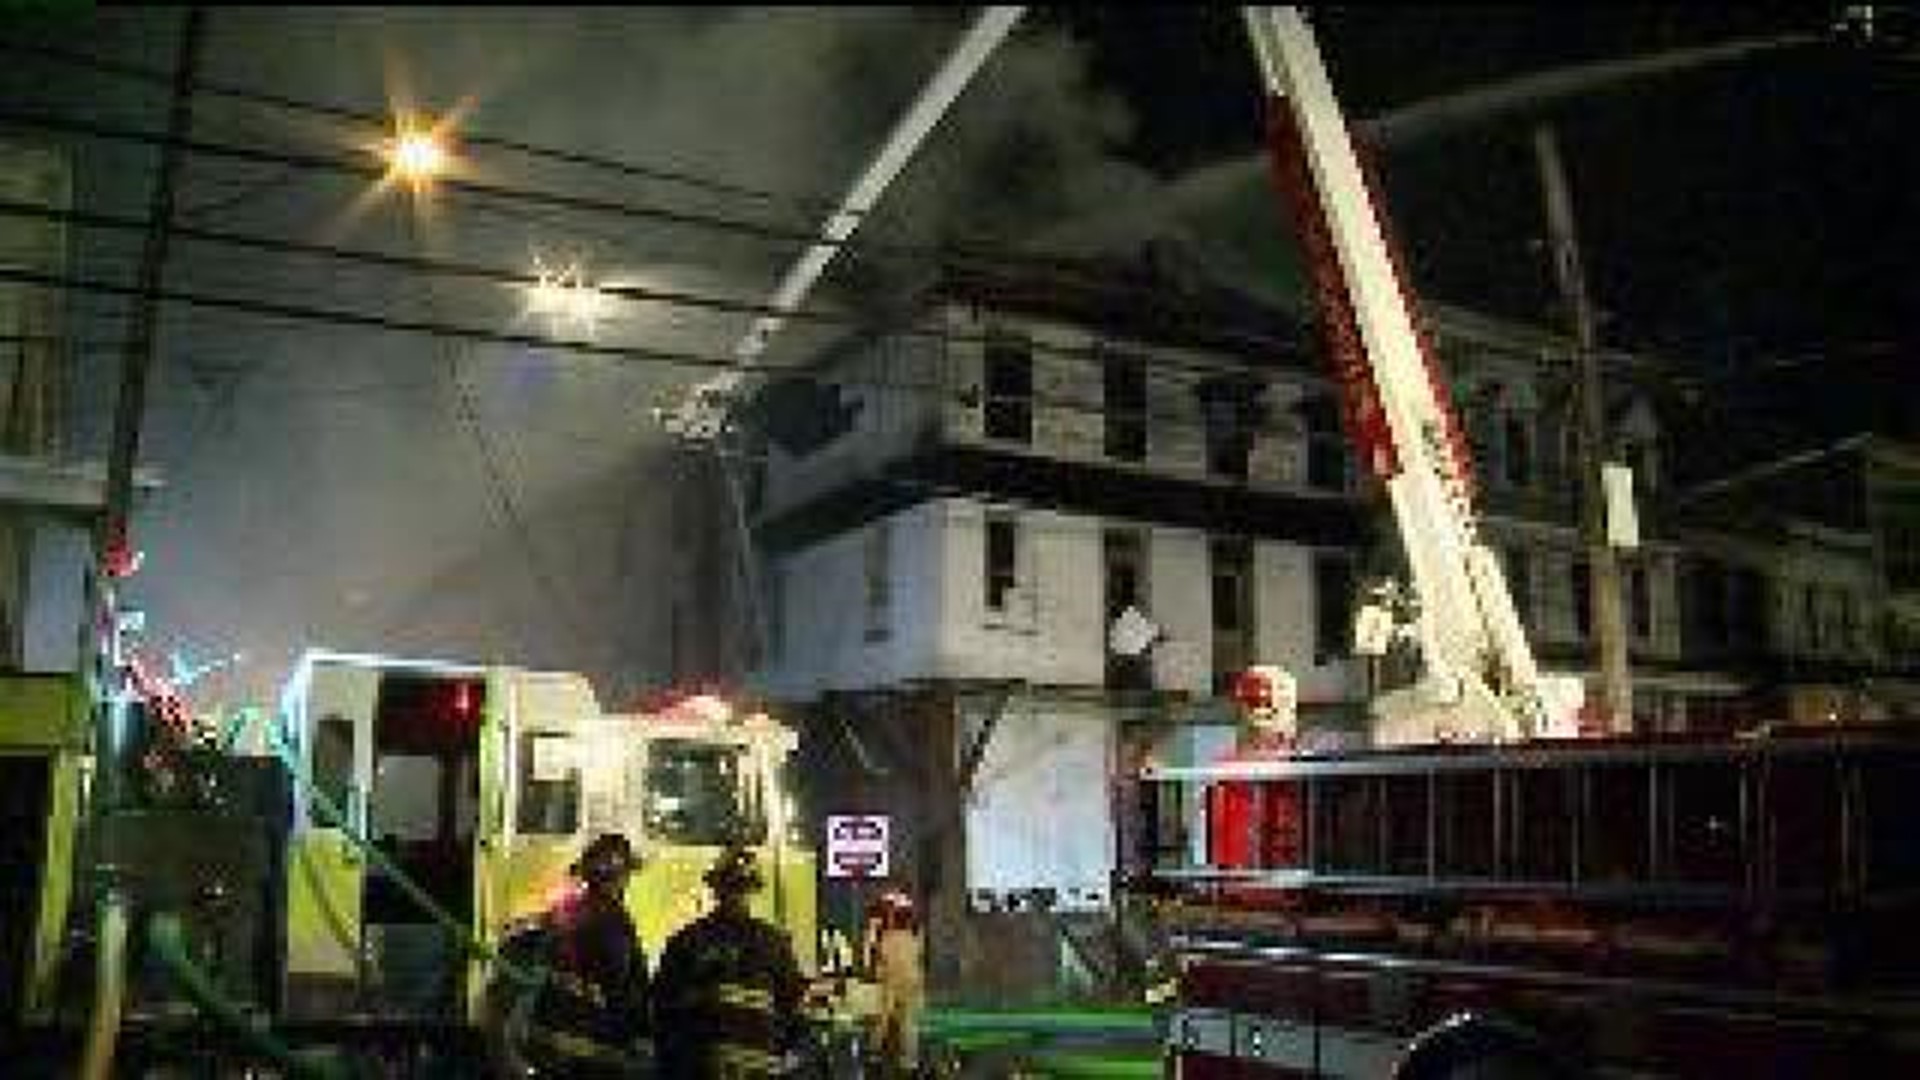 Neighbors On Edge After Fire In Atlas